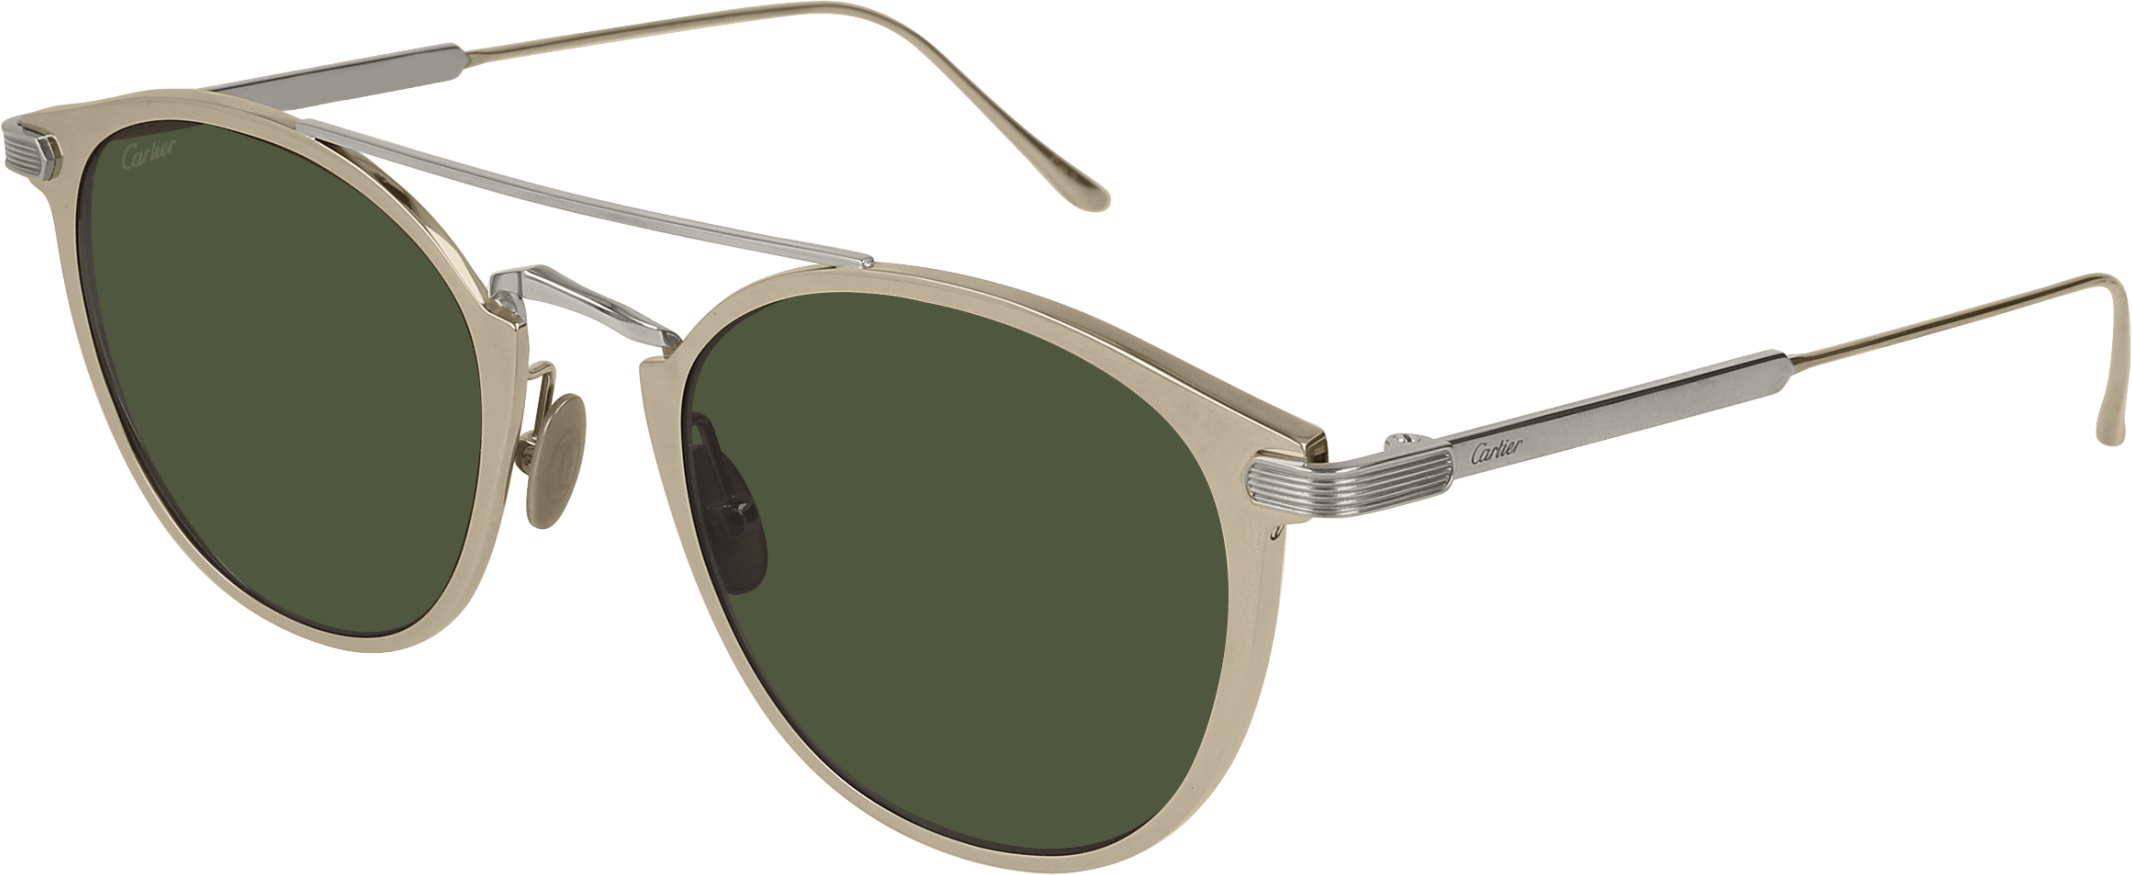 Color_CT0015S-005 - GOLD - GREEN - AR (ANTI REFLECTIVE) - POLARIZED